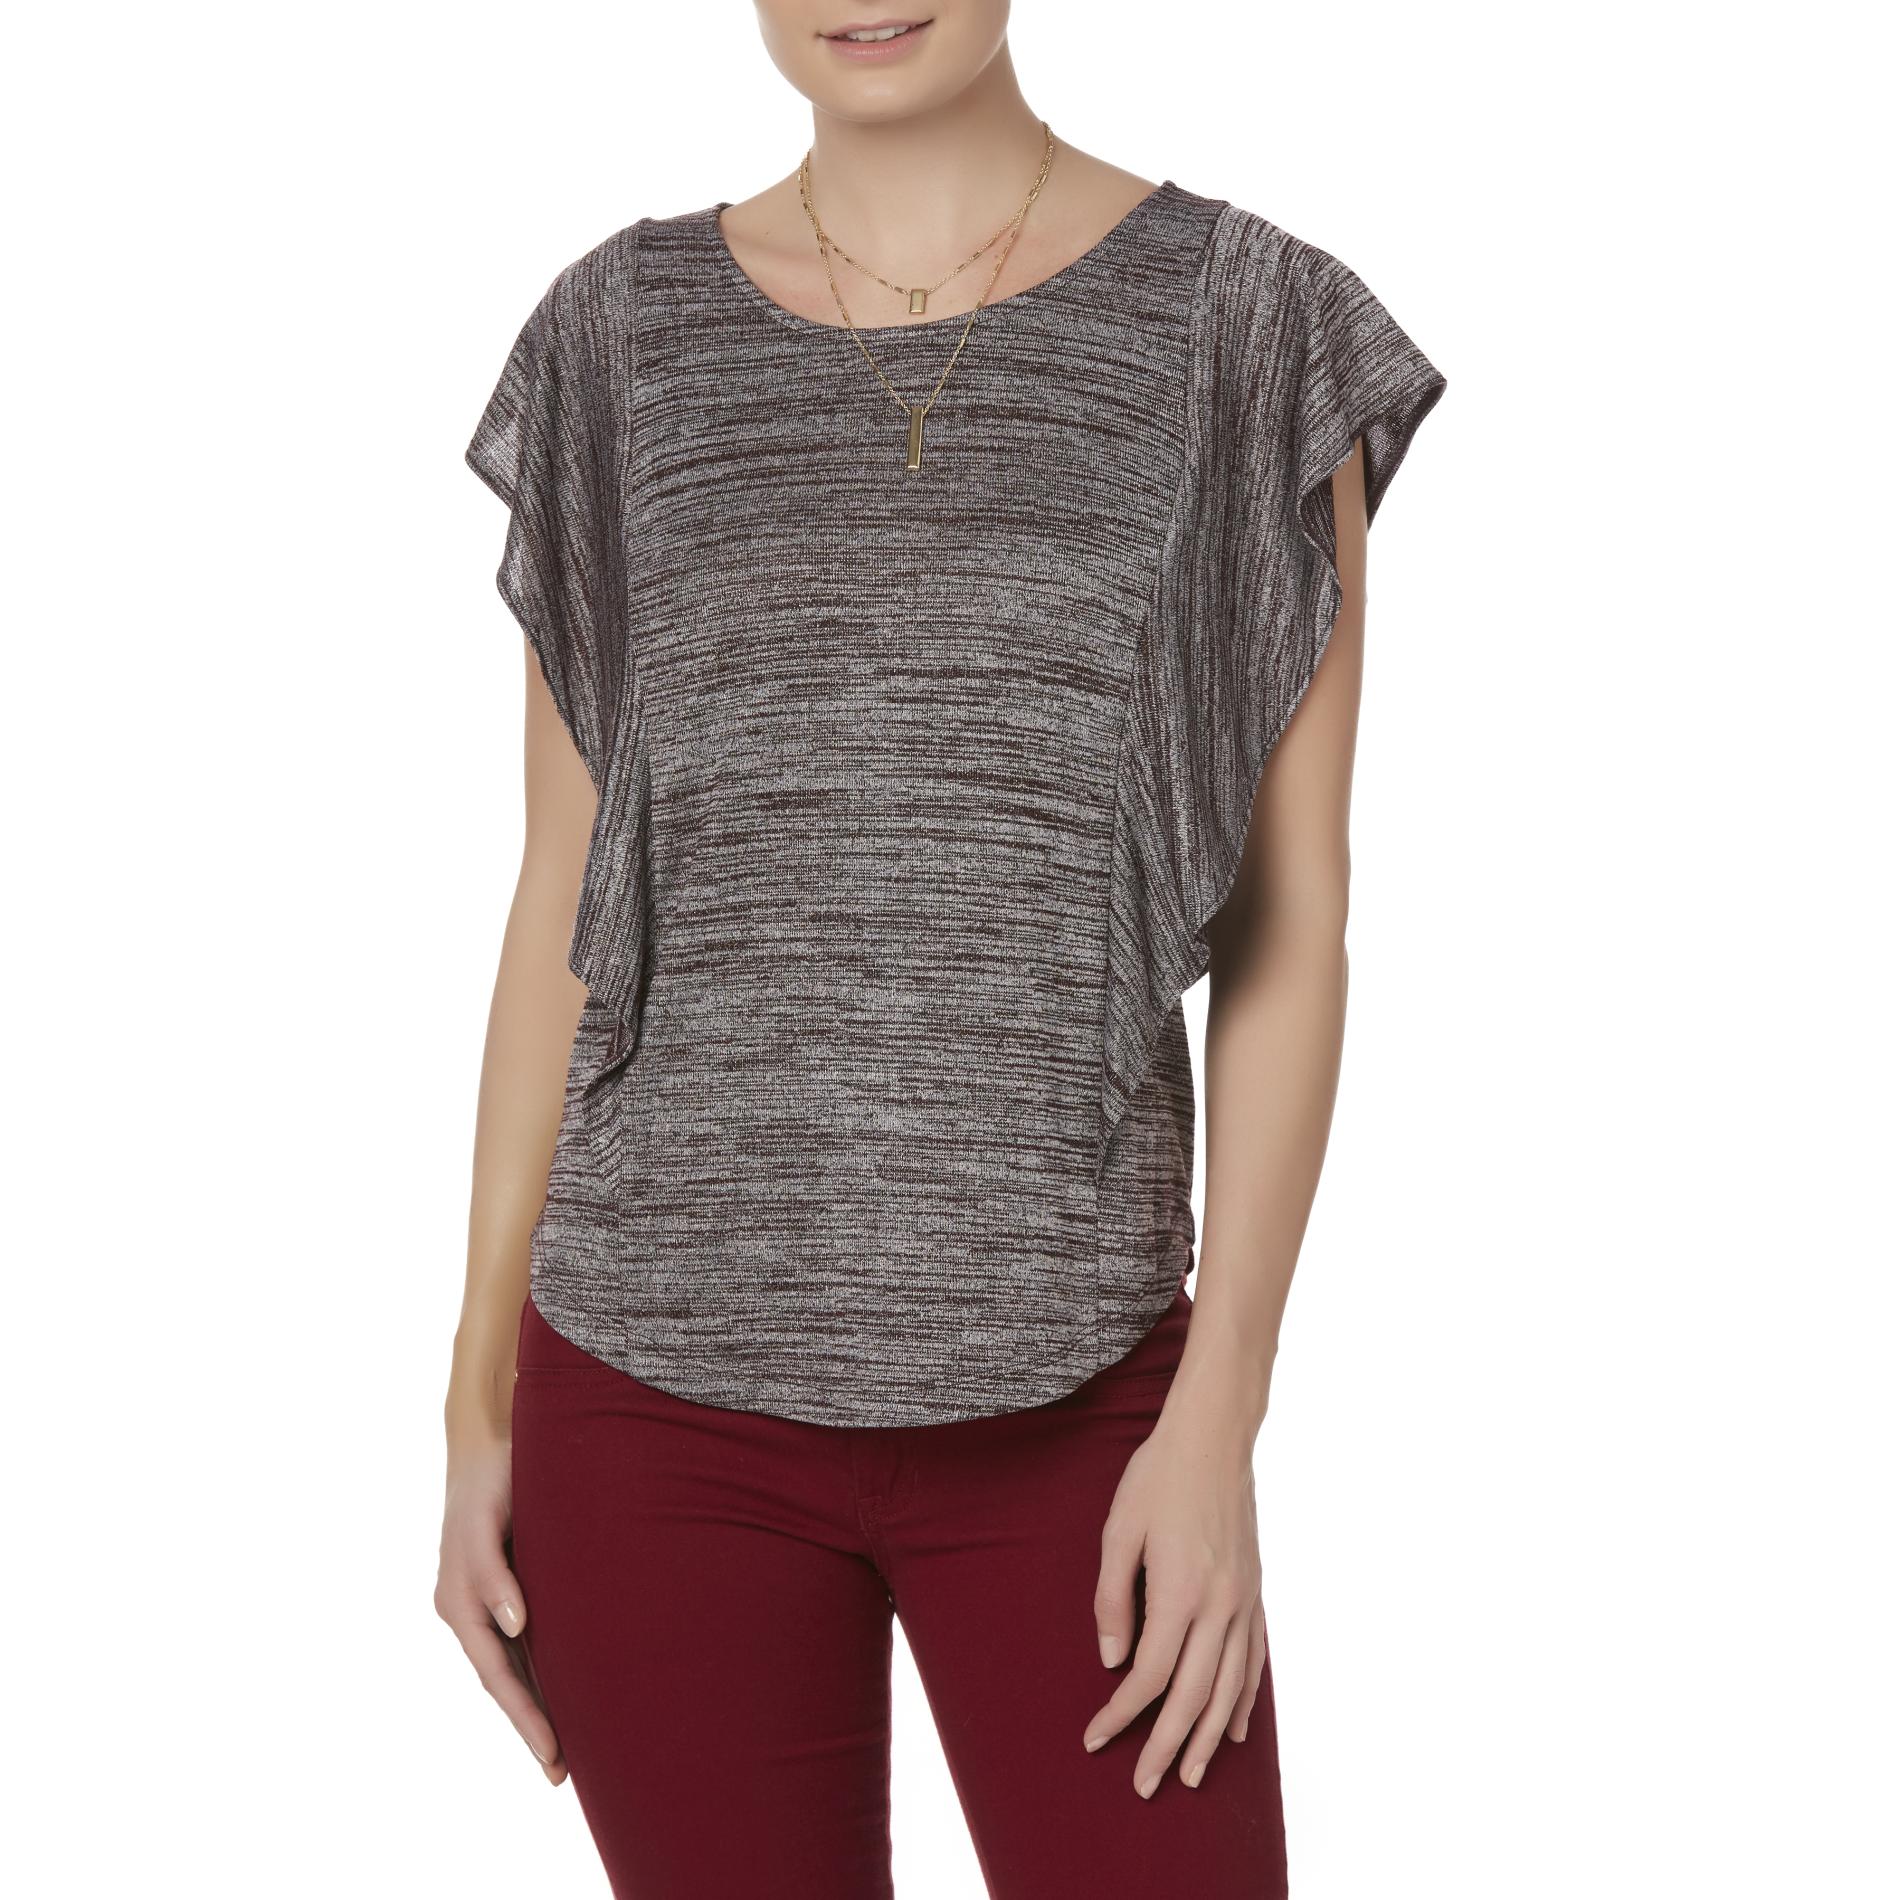 Simply Styled Women's Ruffle Sleeve Top - Marled